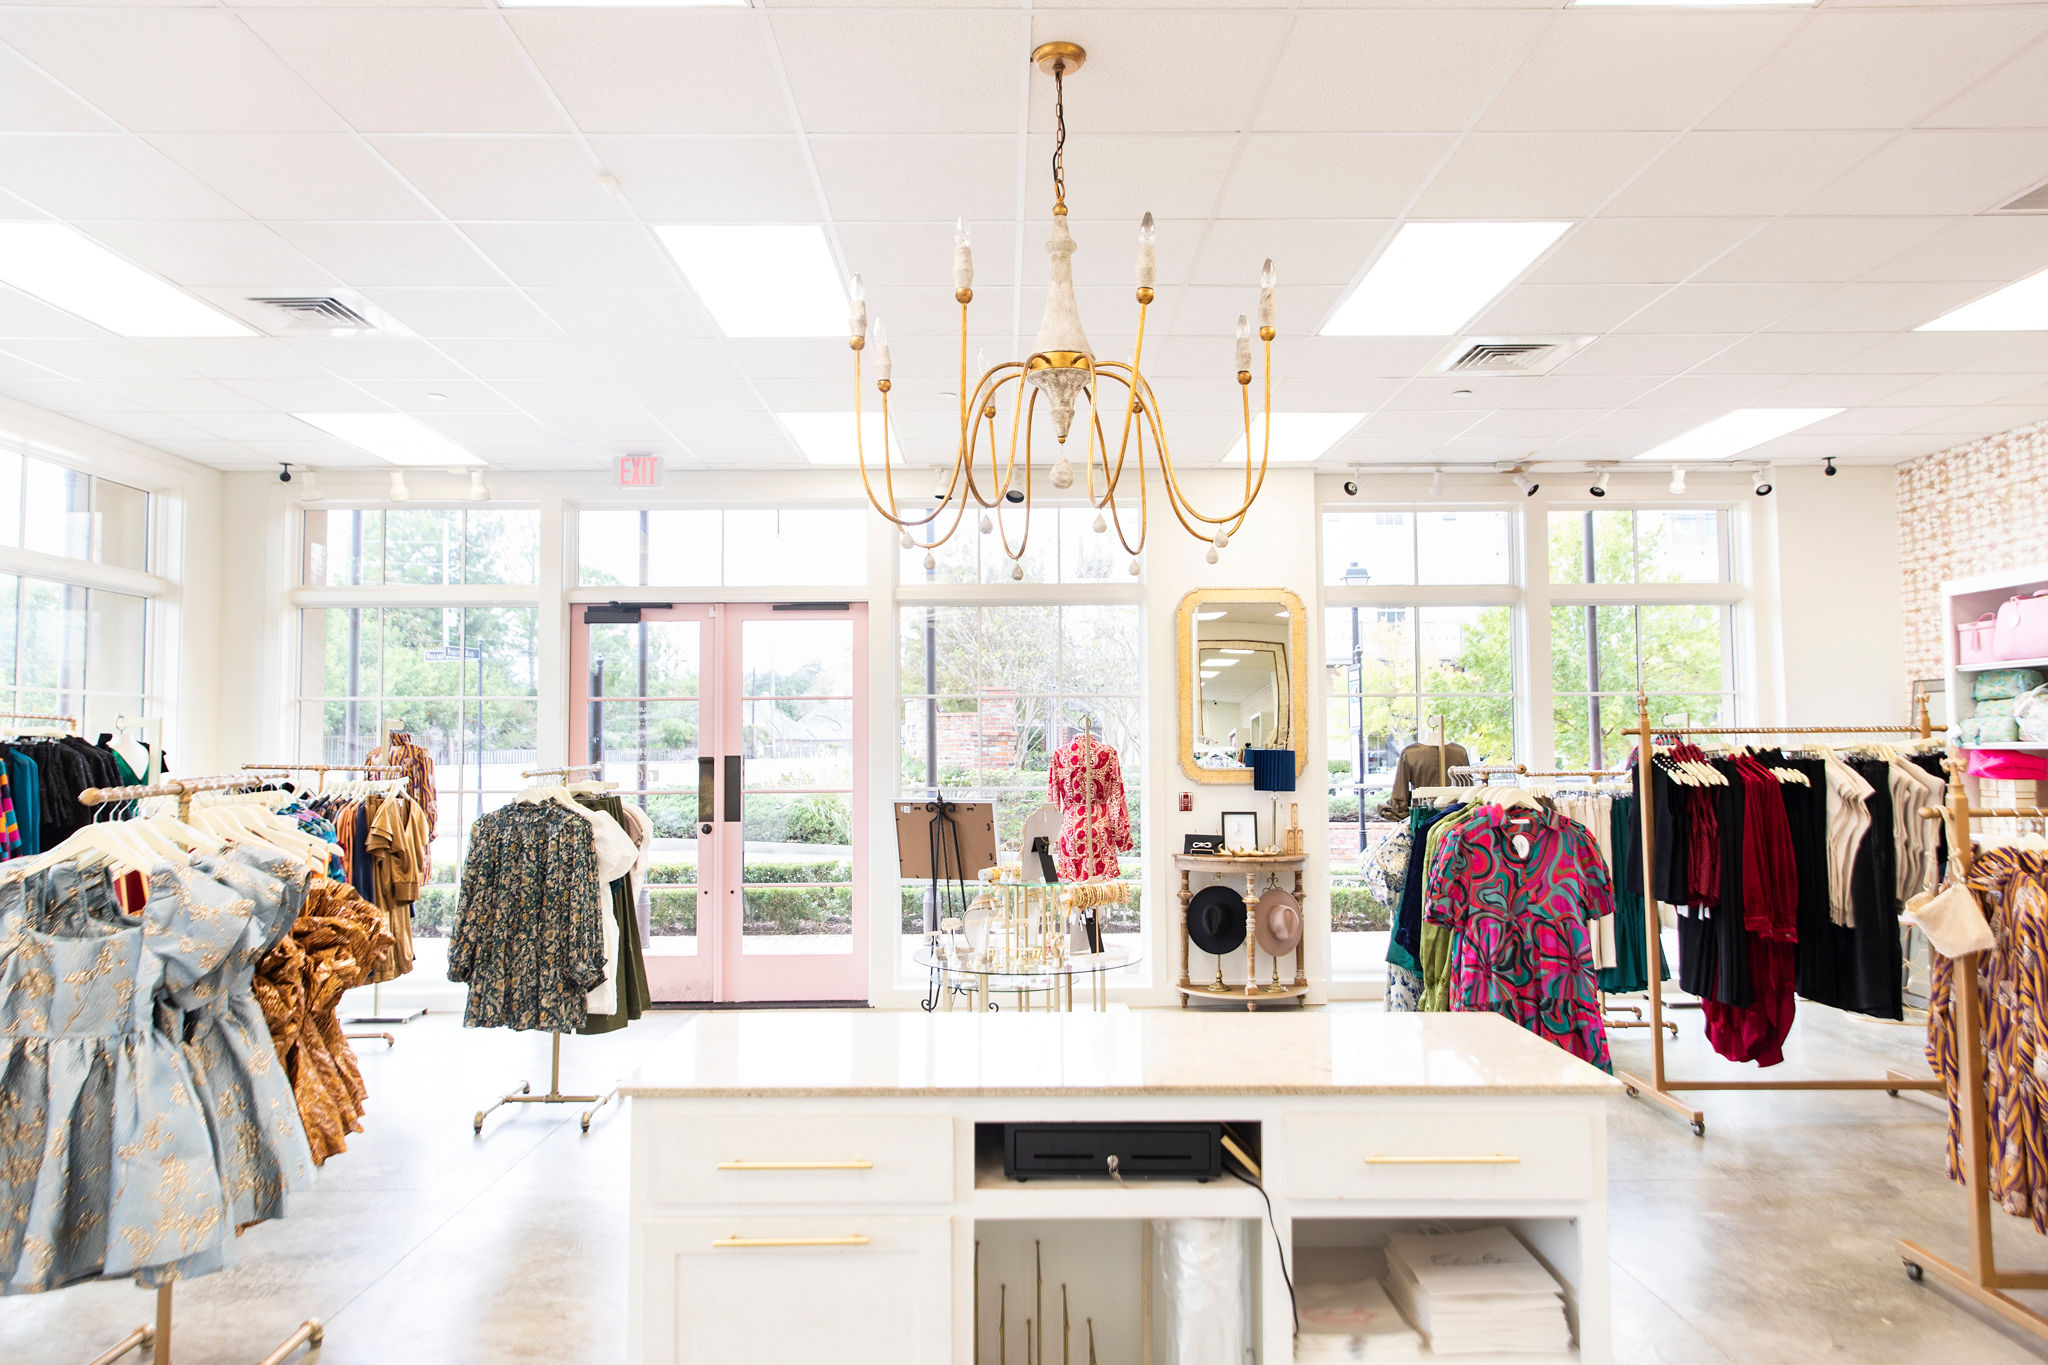 Emily Katherine Boutique formally expands into Baton Rouge this weekend